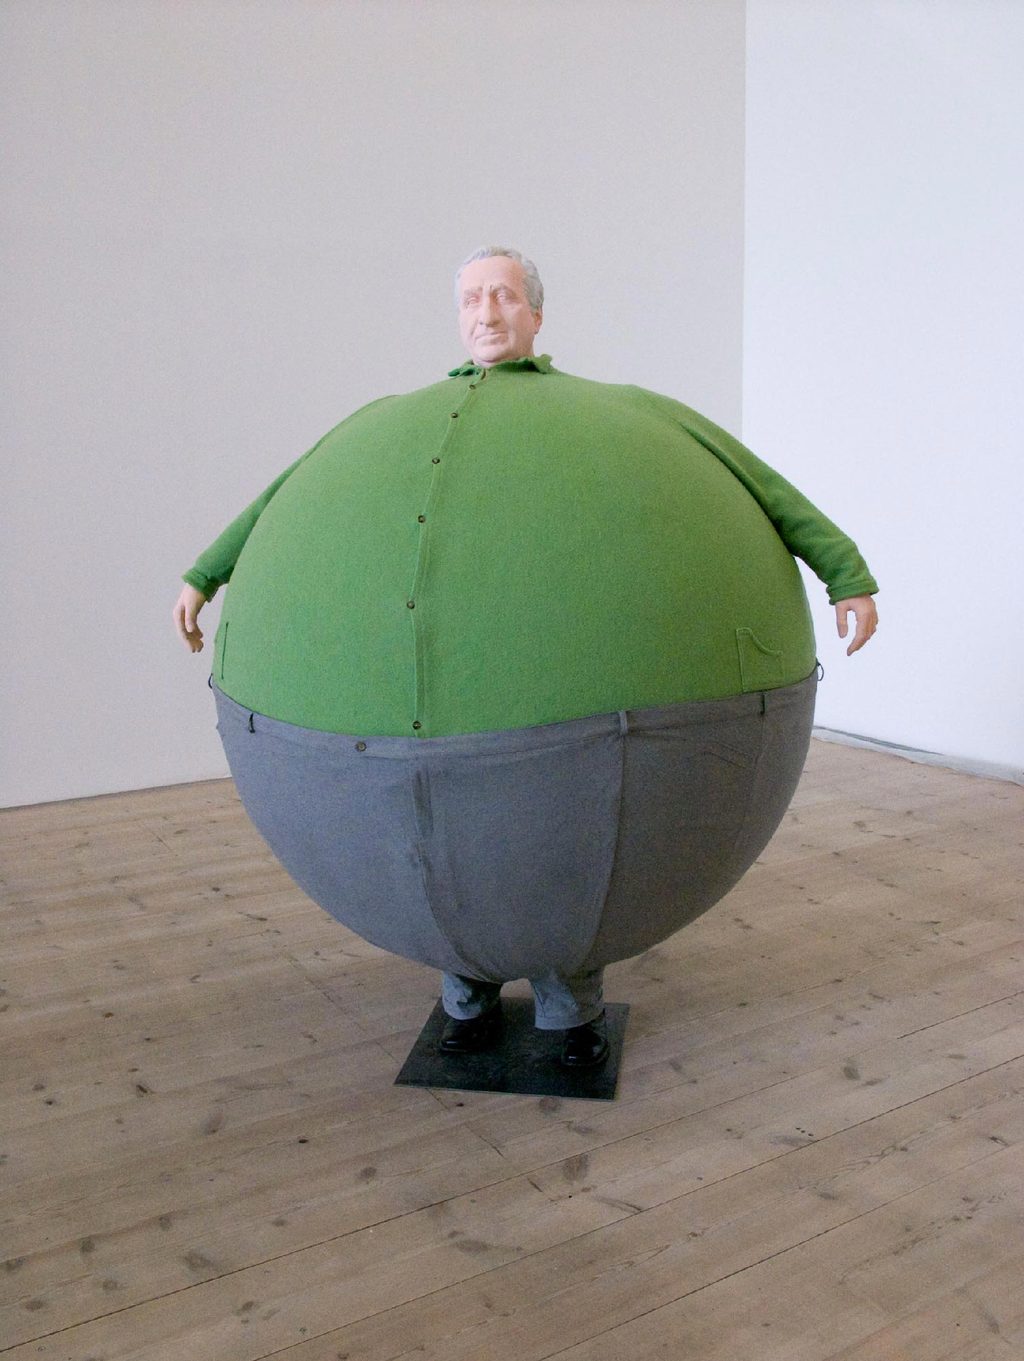 Erwin Wurm, The Artist who swallowed the world when it was still a disc, 2006